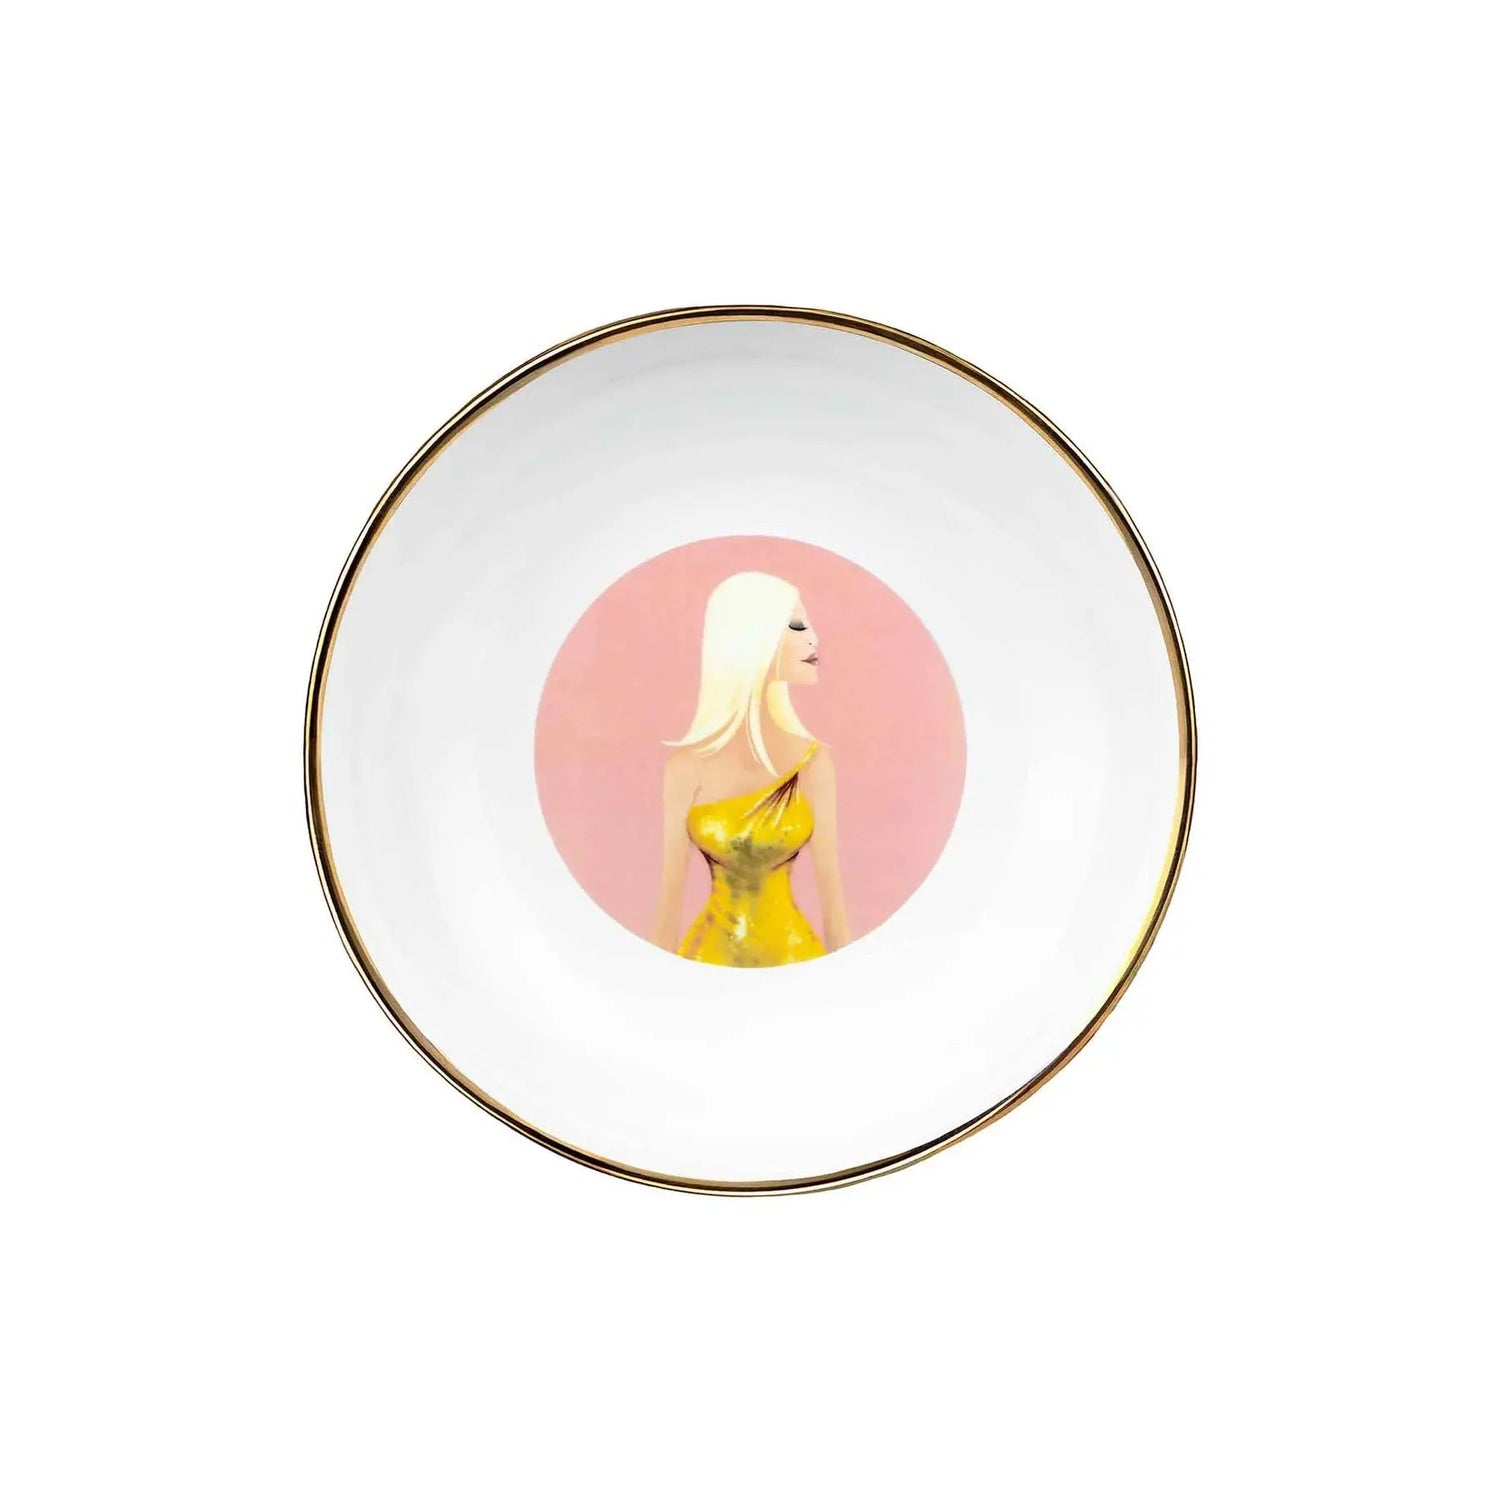 Donatella 2022 plate - Who Icons - 27 cm dinner plate